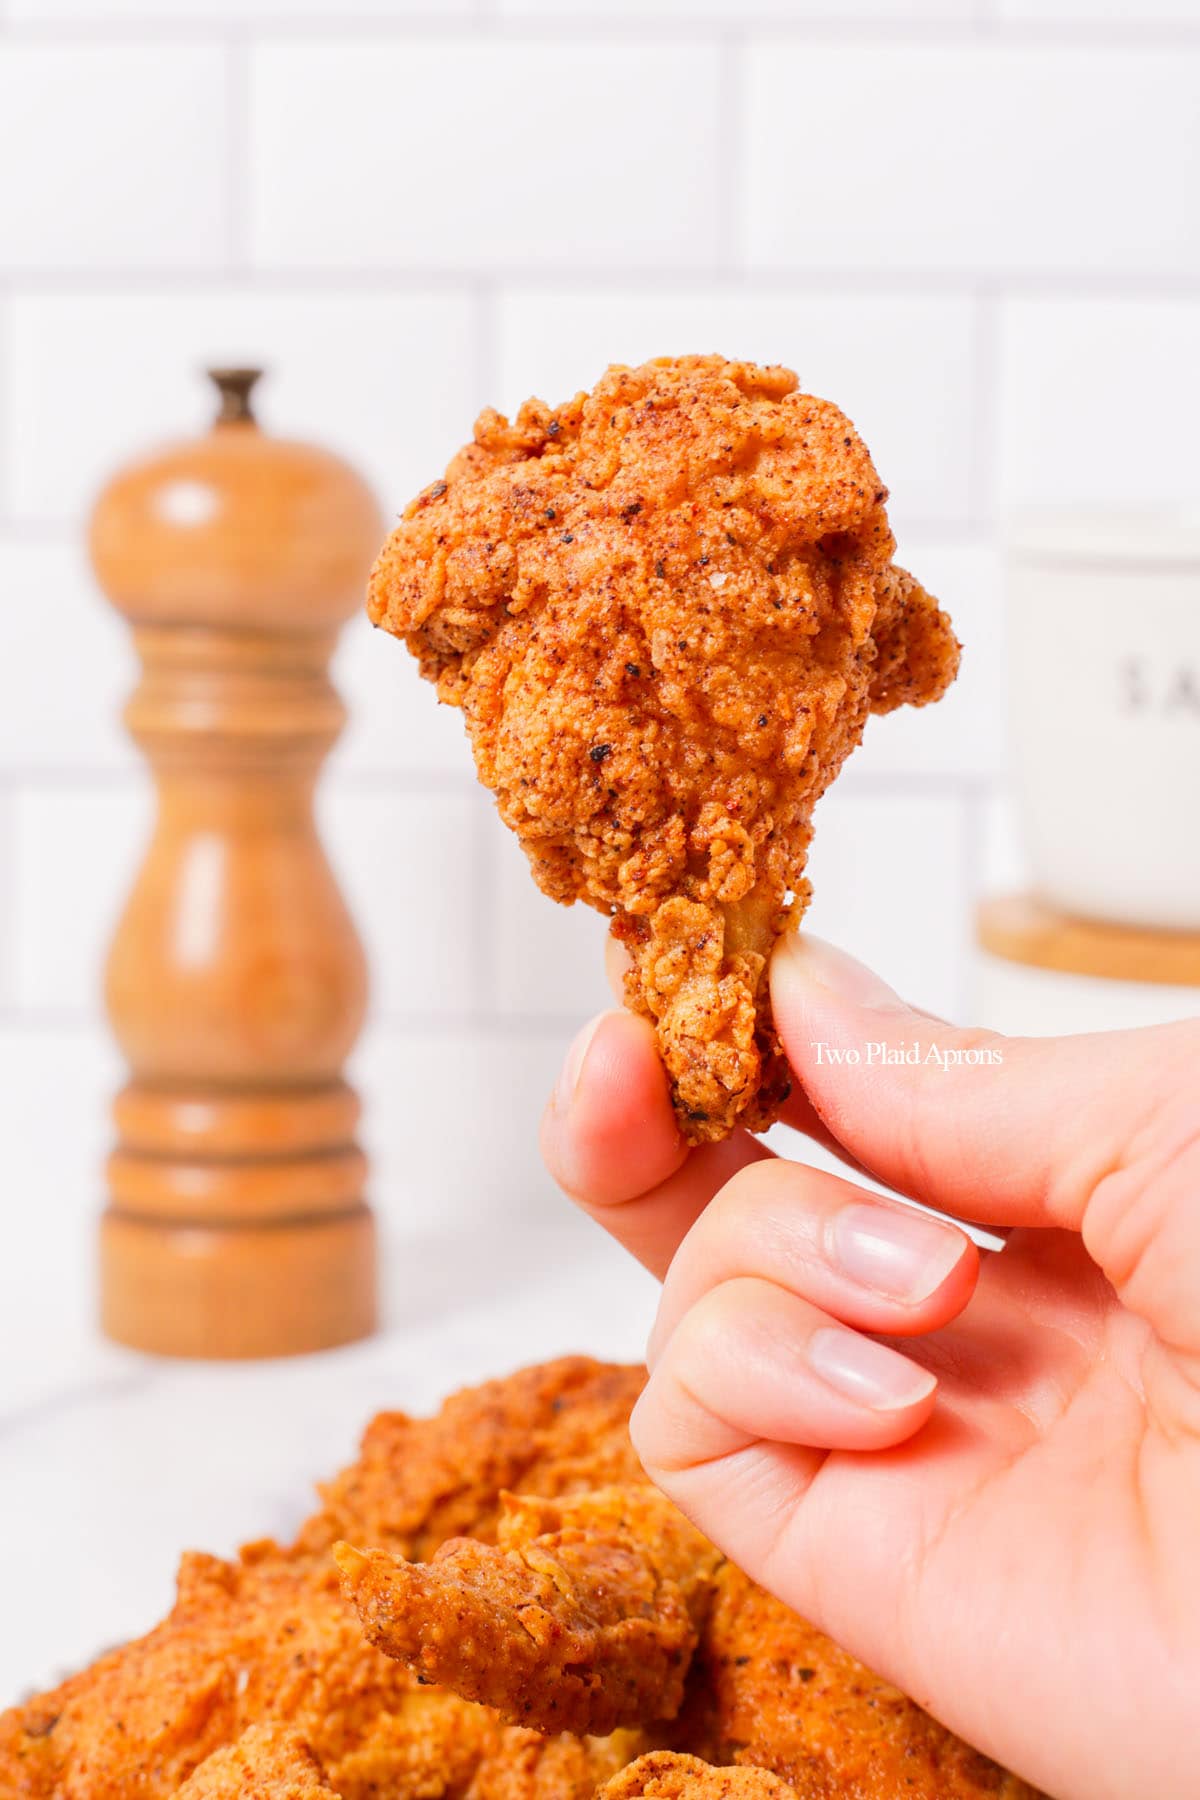 Holding a Korean fried chicken wing.